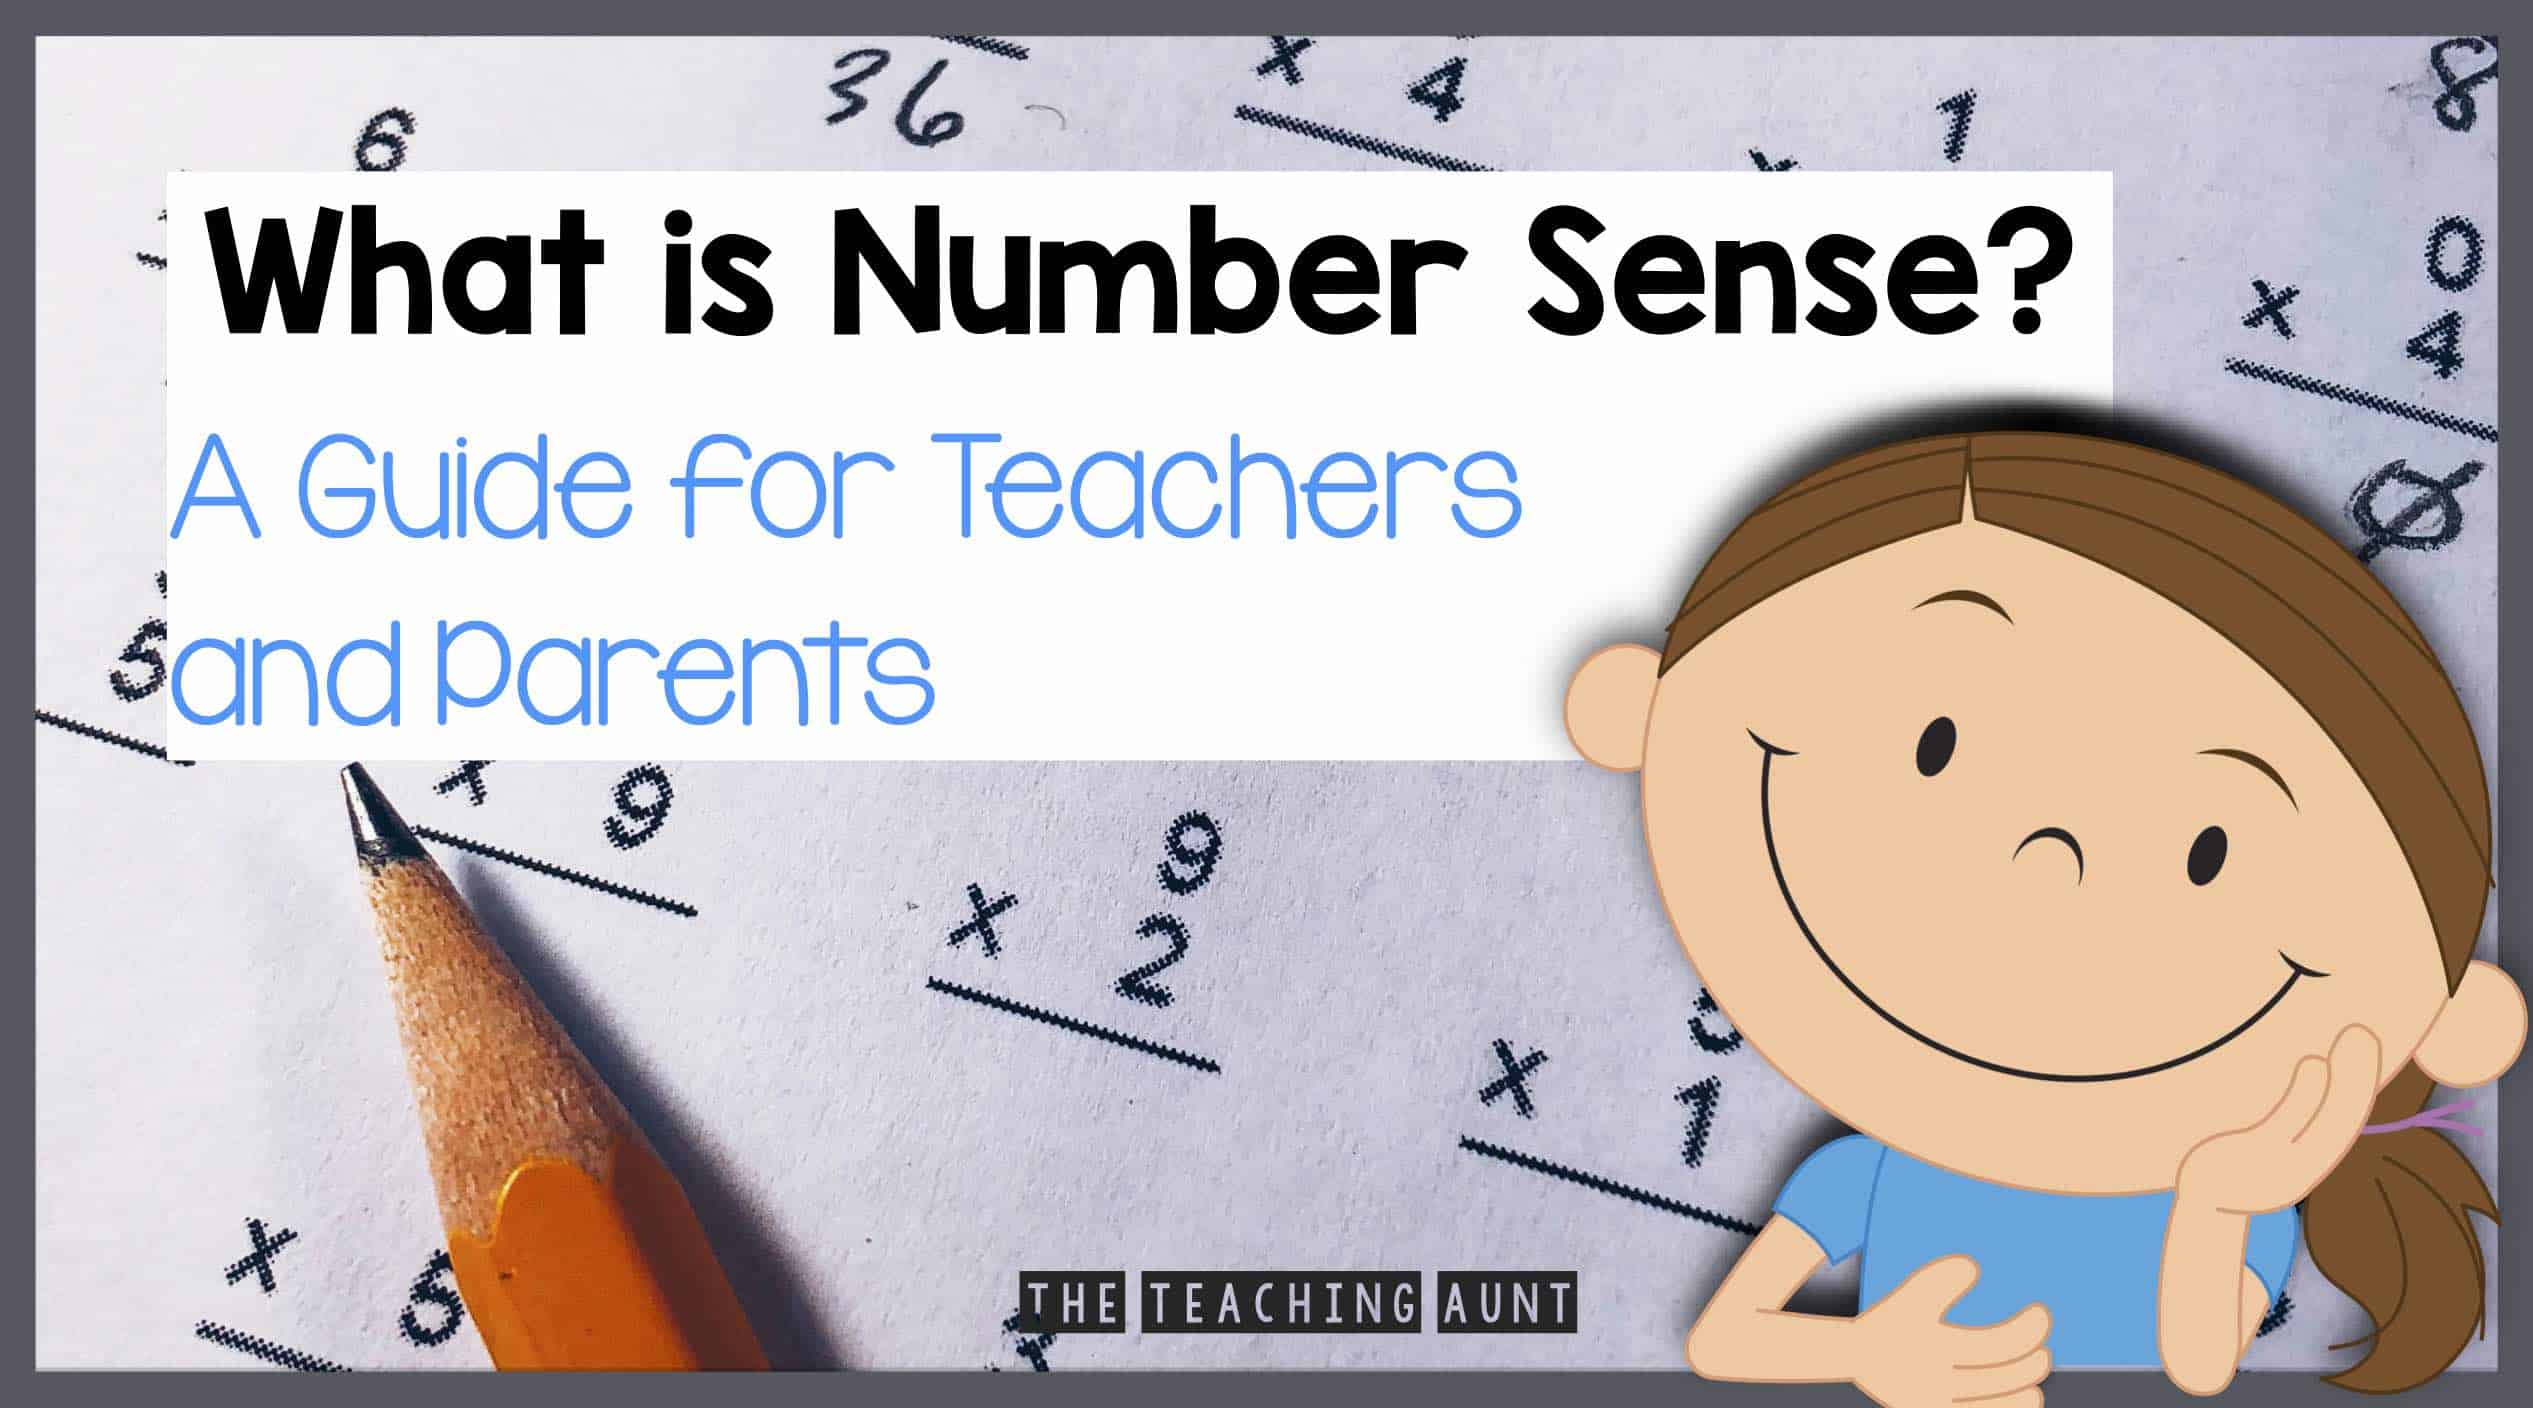 What is number sense?